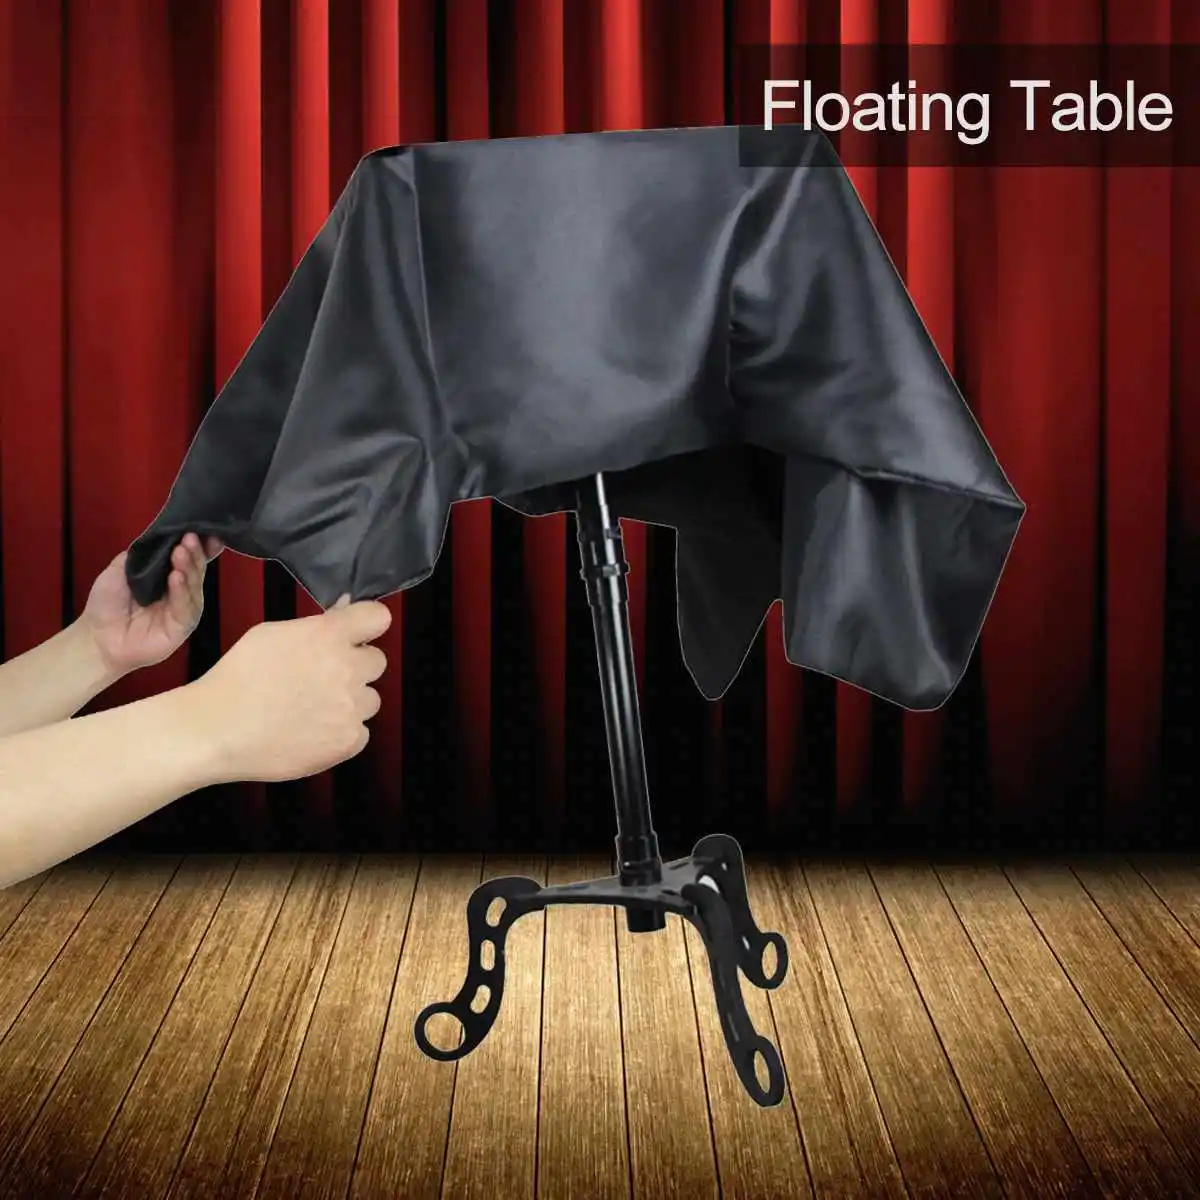 

Black Floating Table Magician Levitation Trick Table Stage Magic Flying Floating Table Magic Prop Tricks Accessory Children Toy